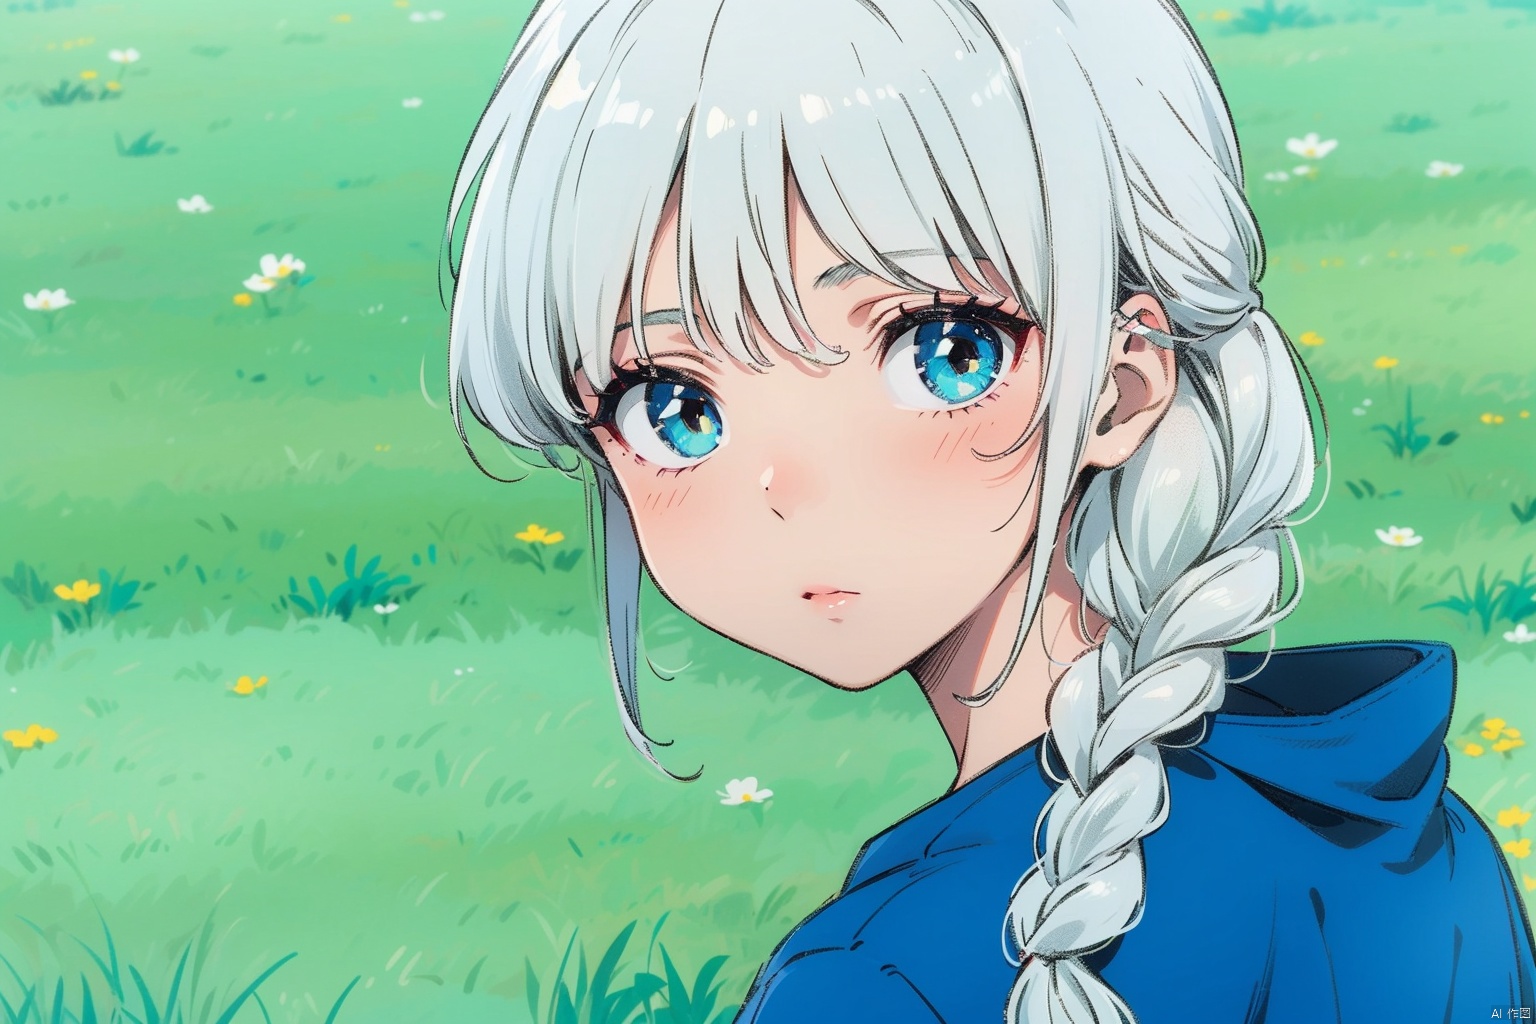  1 girl, (brown skin), silver-white hair, looking back, blue clothes, outdoor, depth of field, green grass, blue sky, white clouds, sunny day, braid